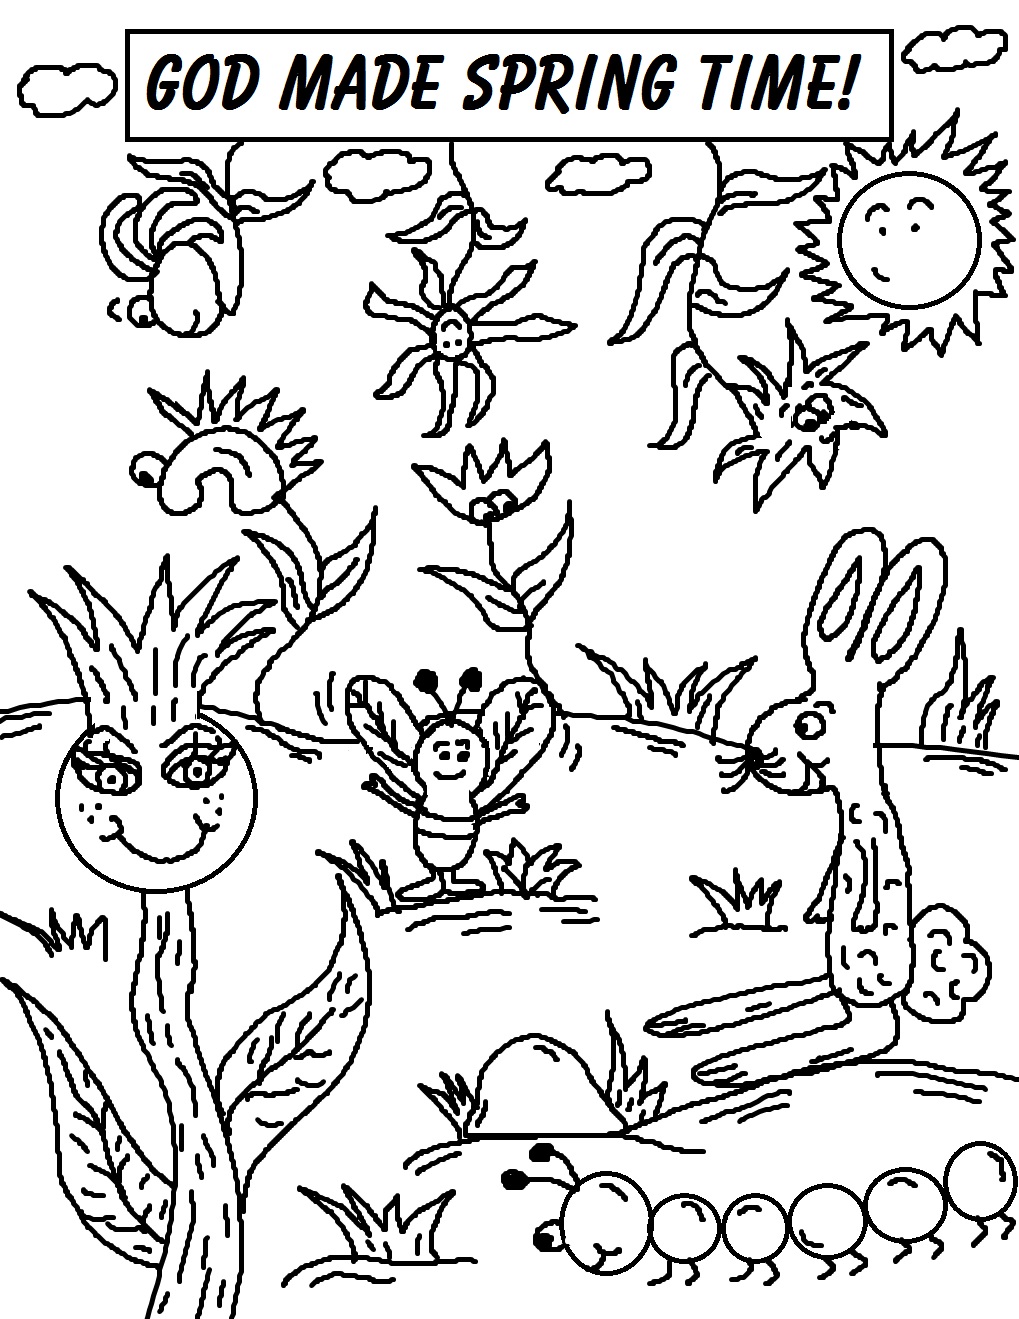 Springtime Coloring Pages | Holiday Coloring Pages